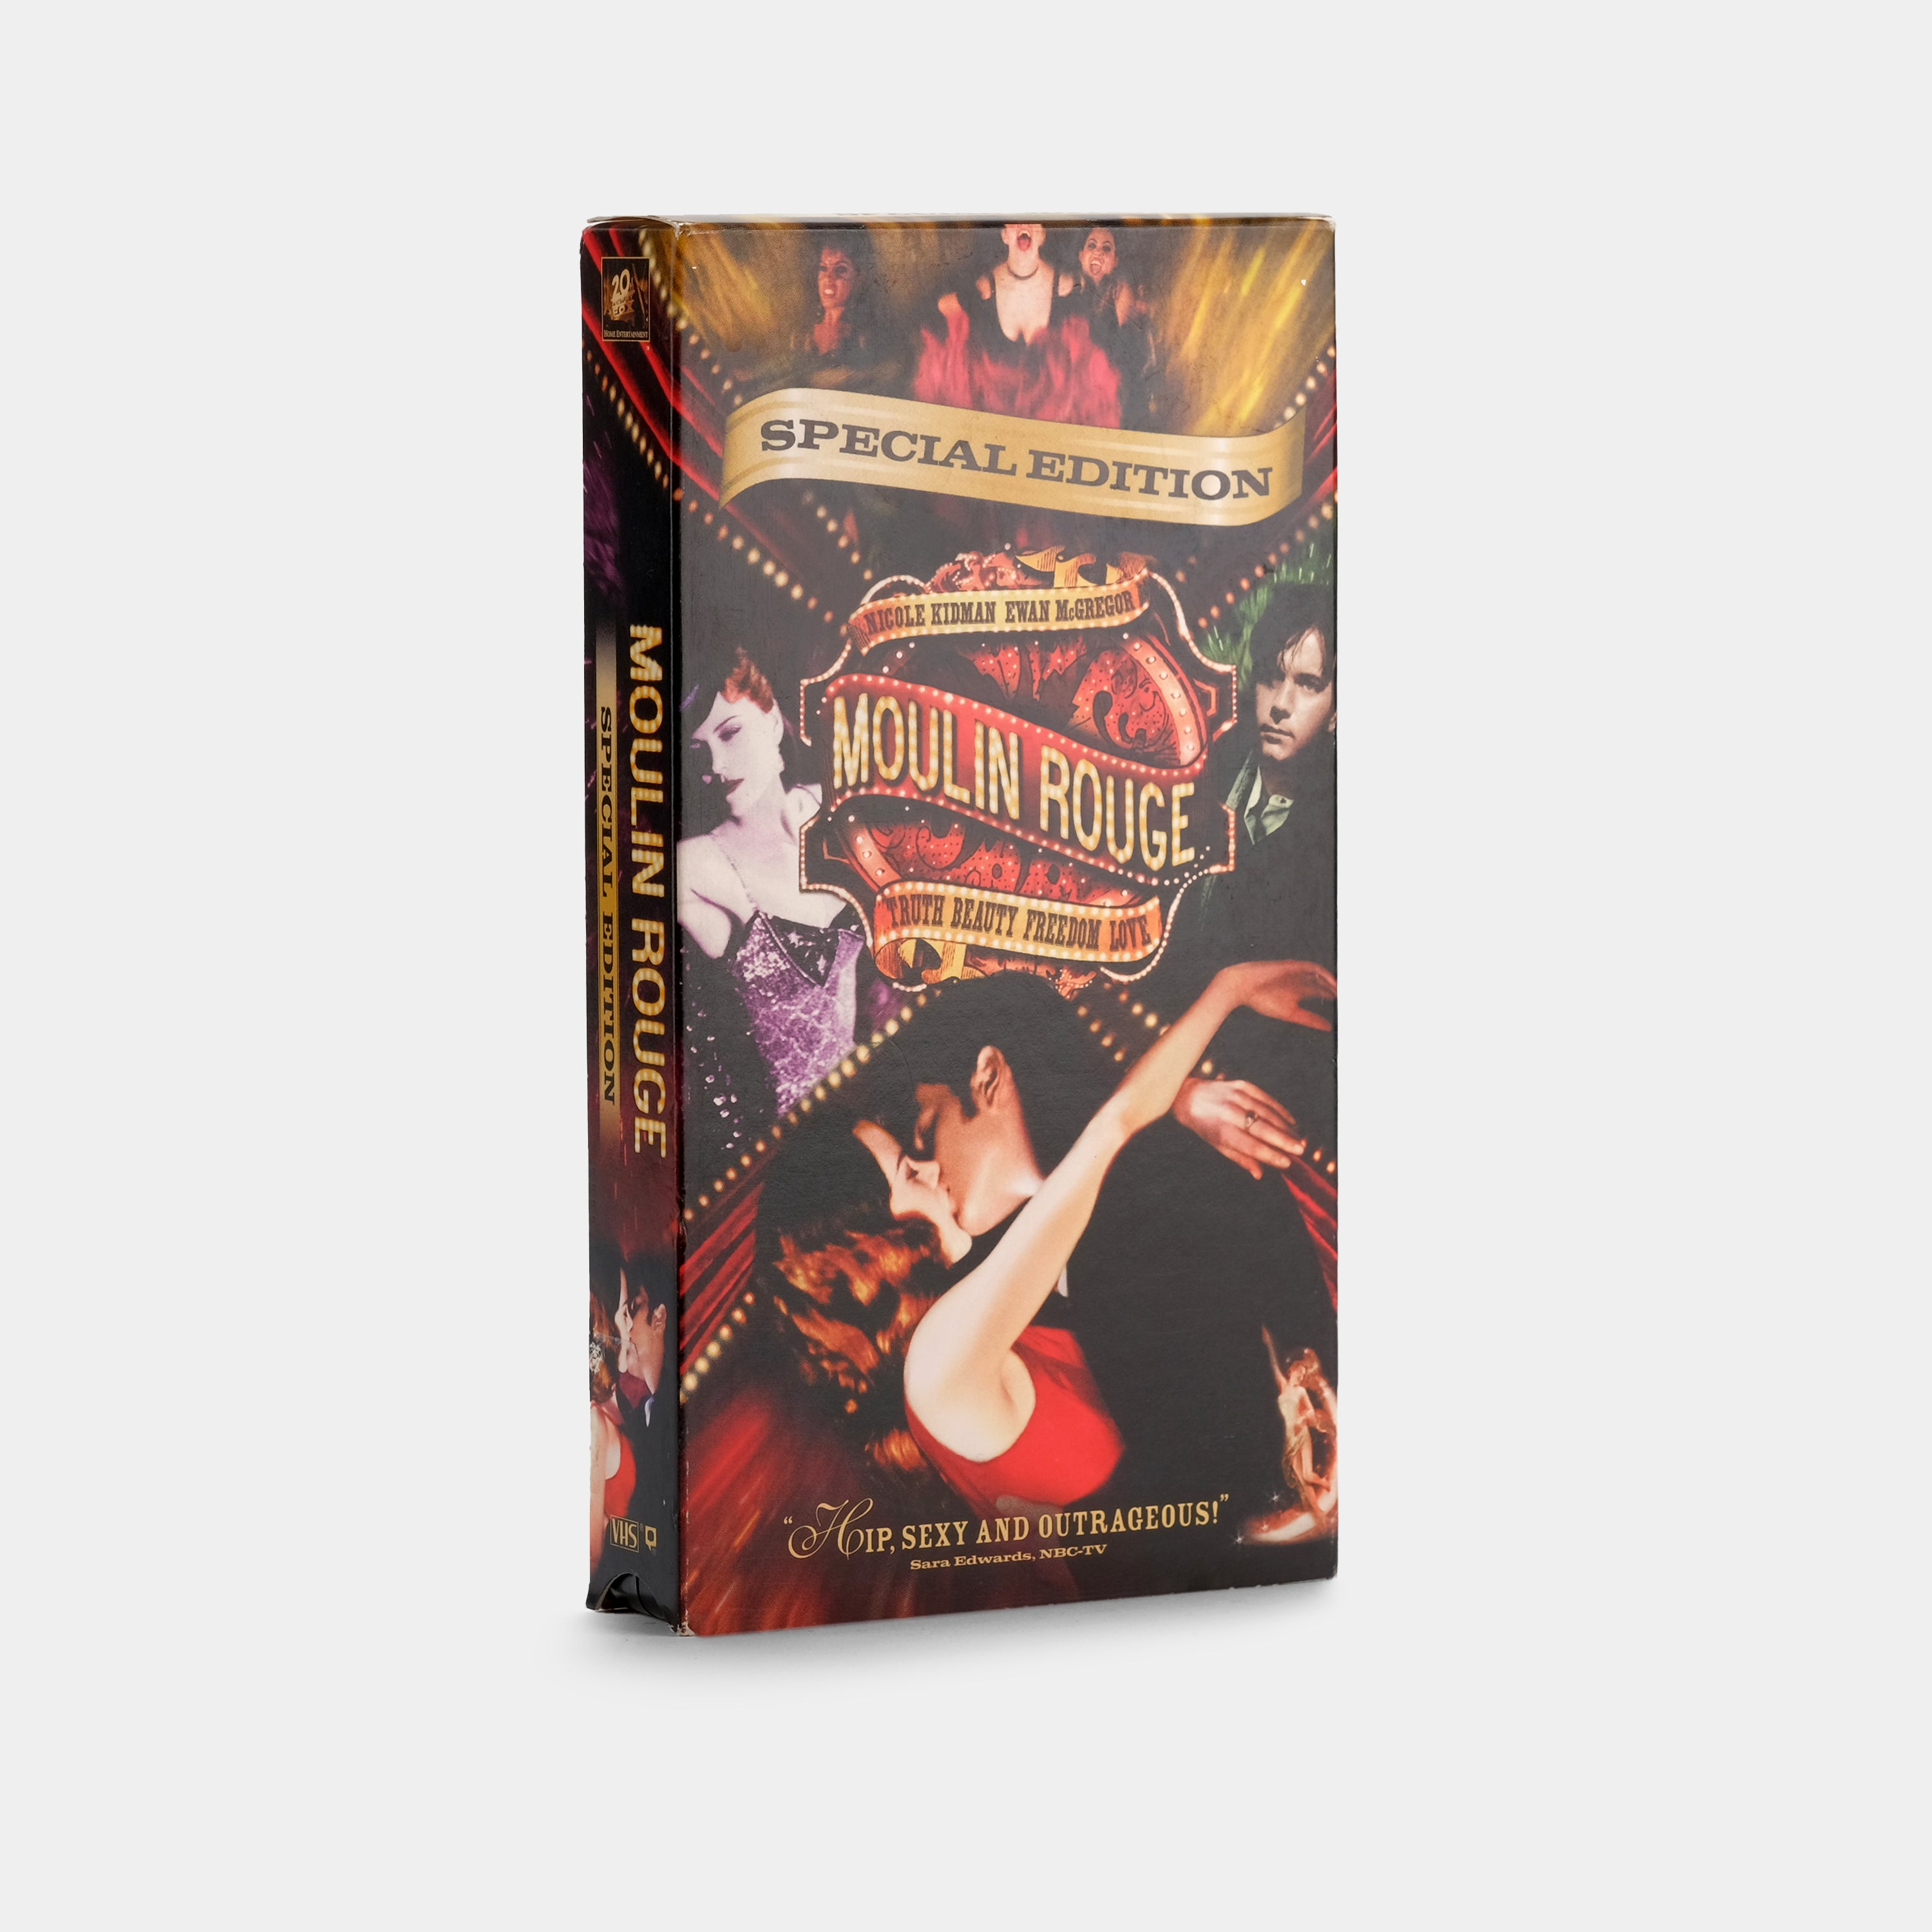 Moulin Rouge Special Edition VHS Tape